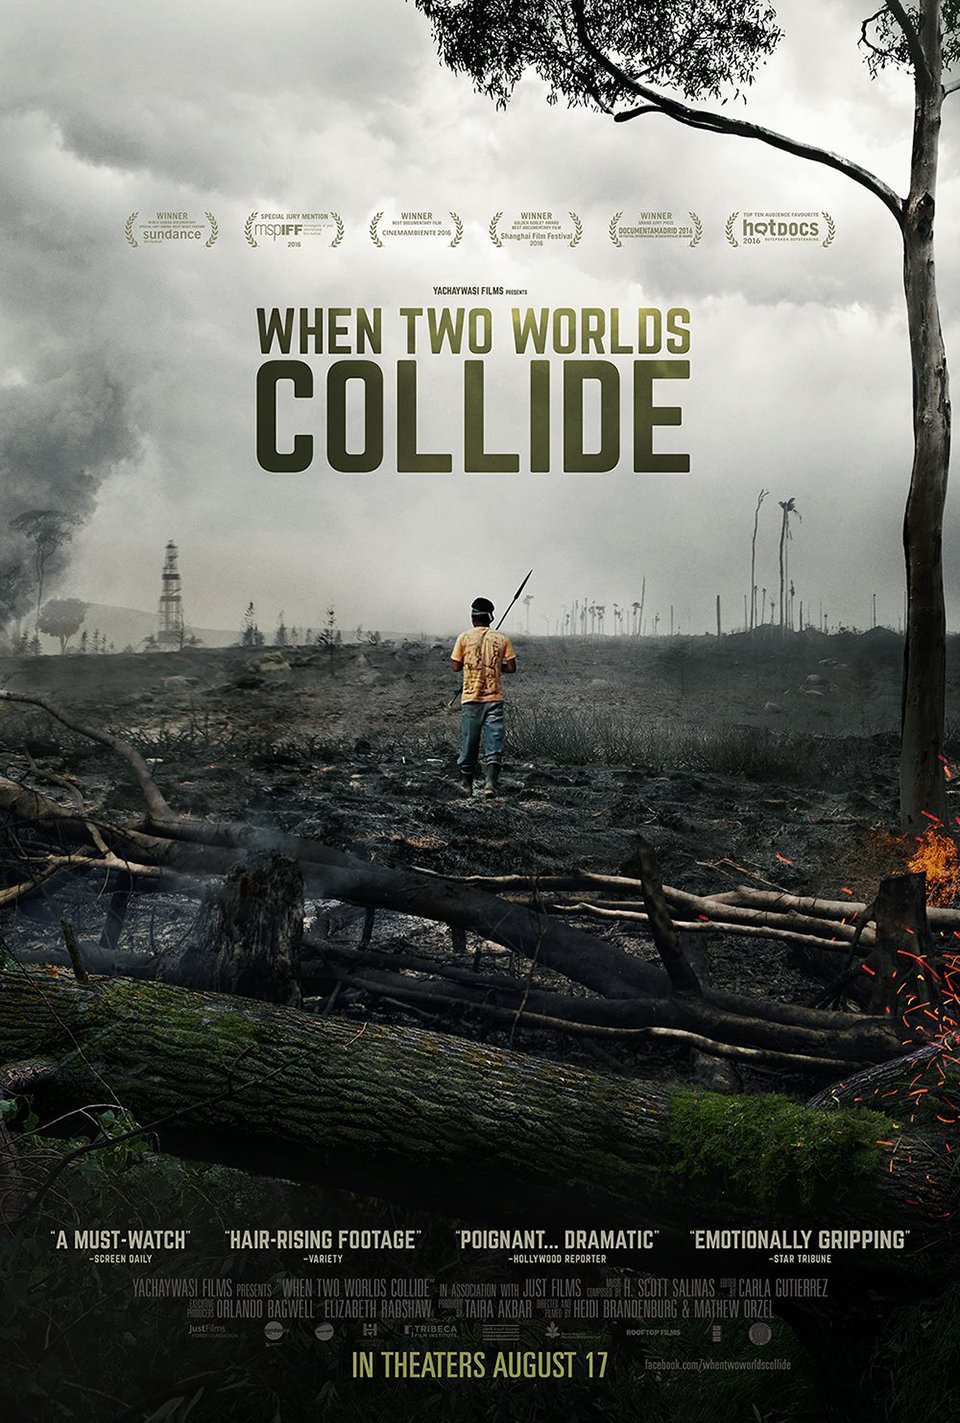 When Two Worlds Collide (Trailer)